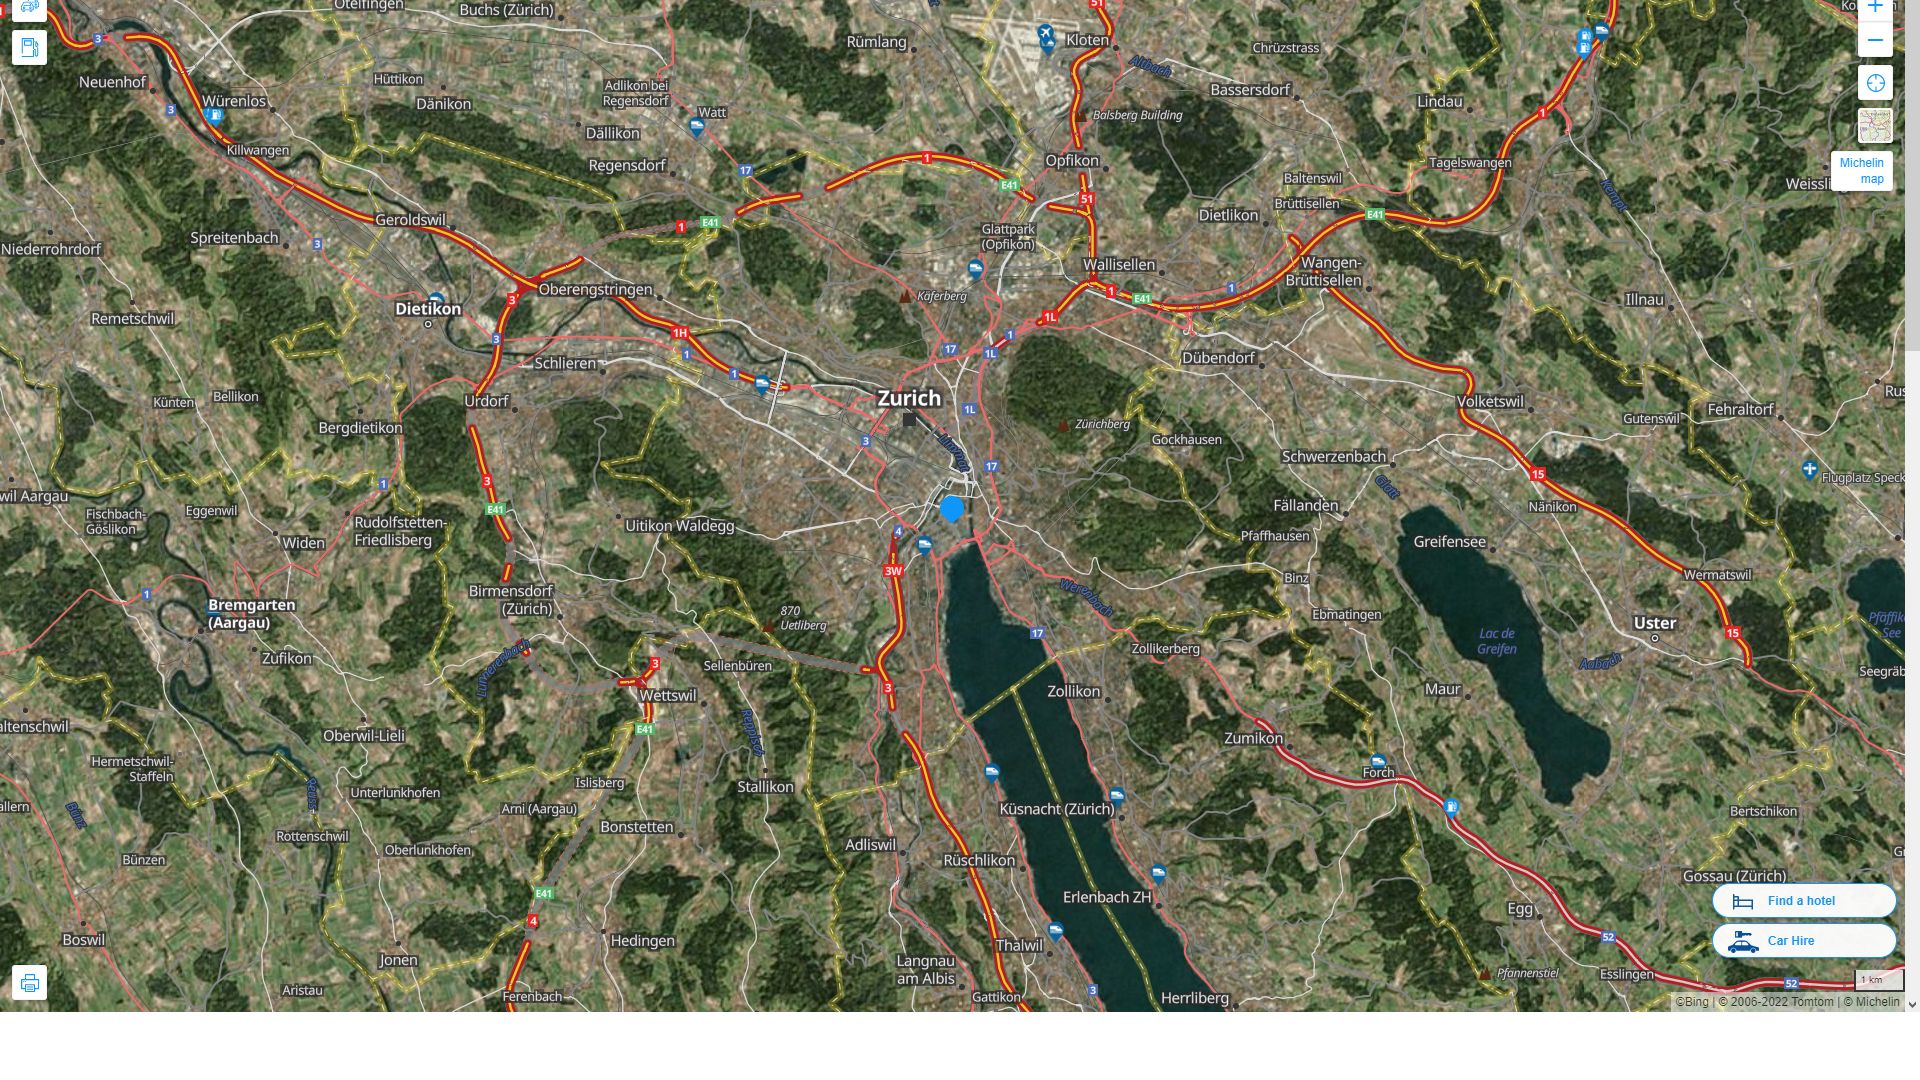 Zurich Highway and Road Map with Satellite View